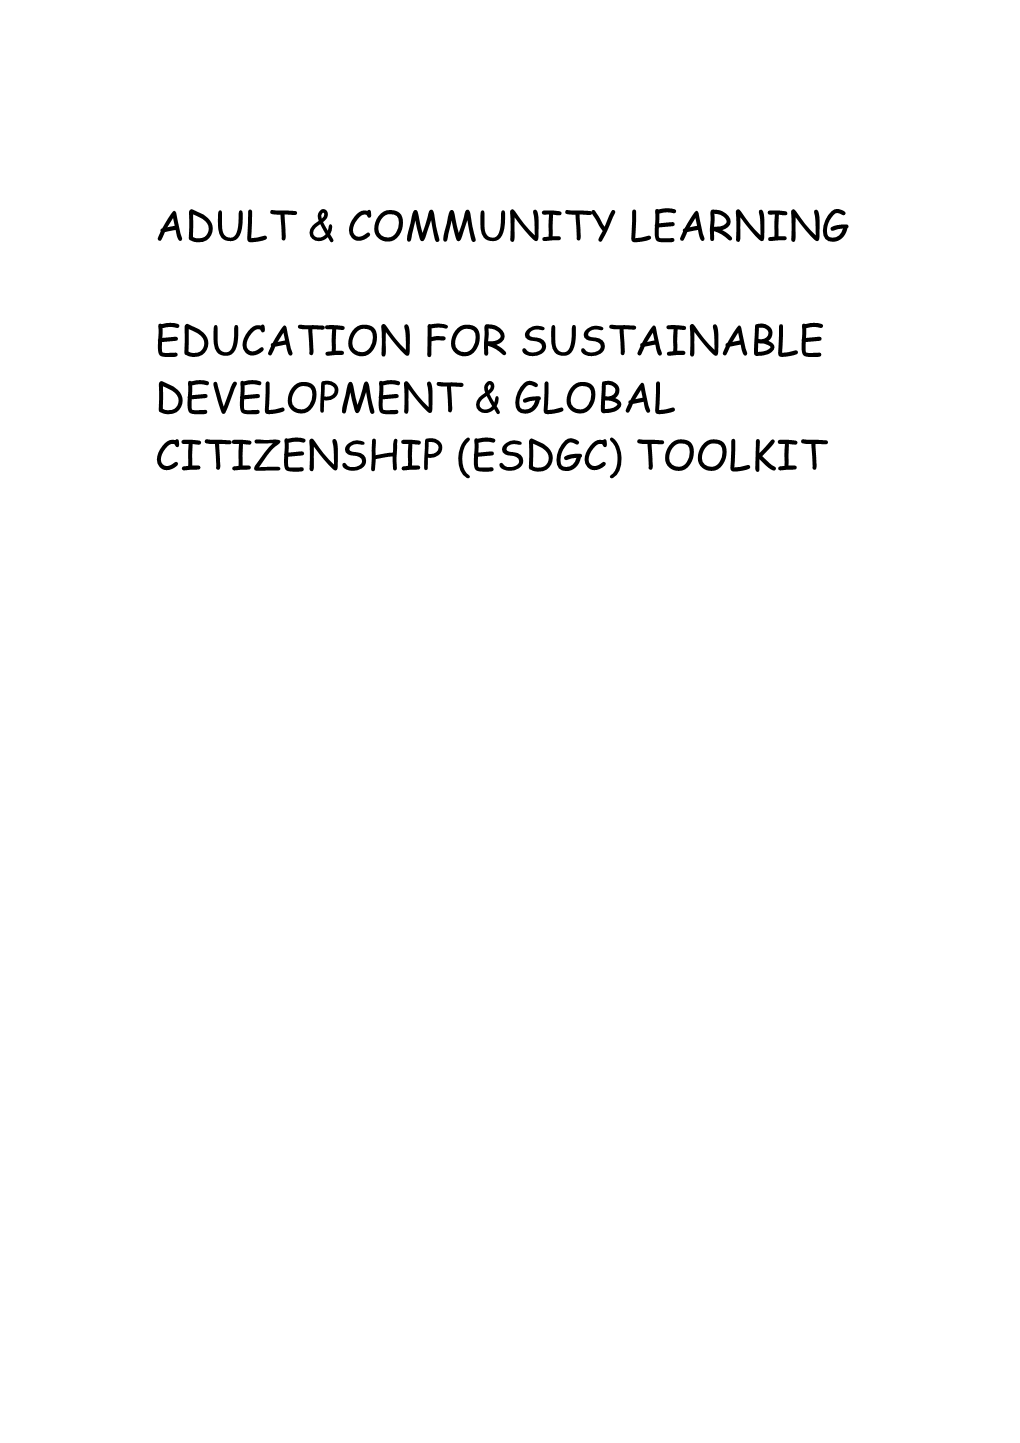 Education For Sustainable Development & Global Citizenship Toolkit – Adult & Community Education